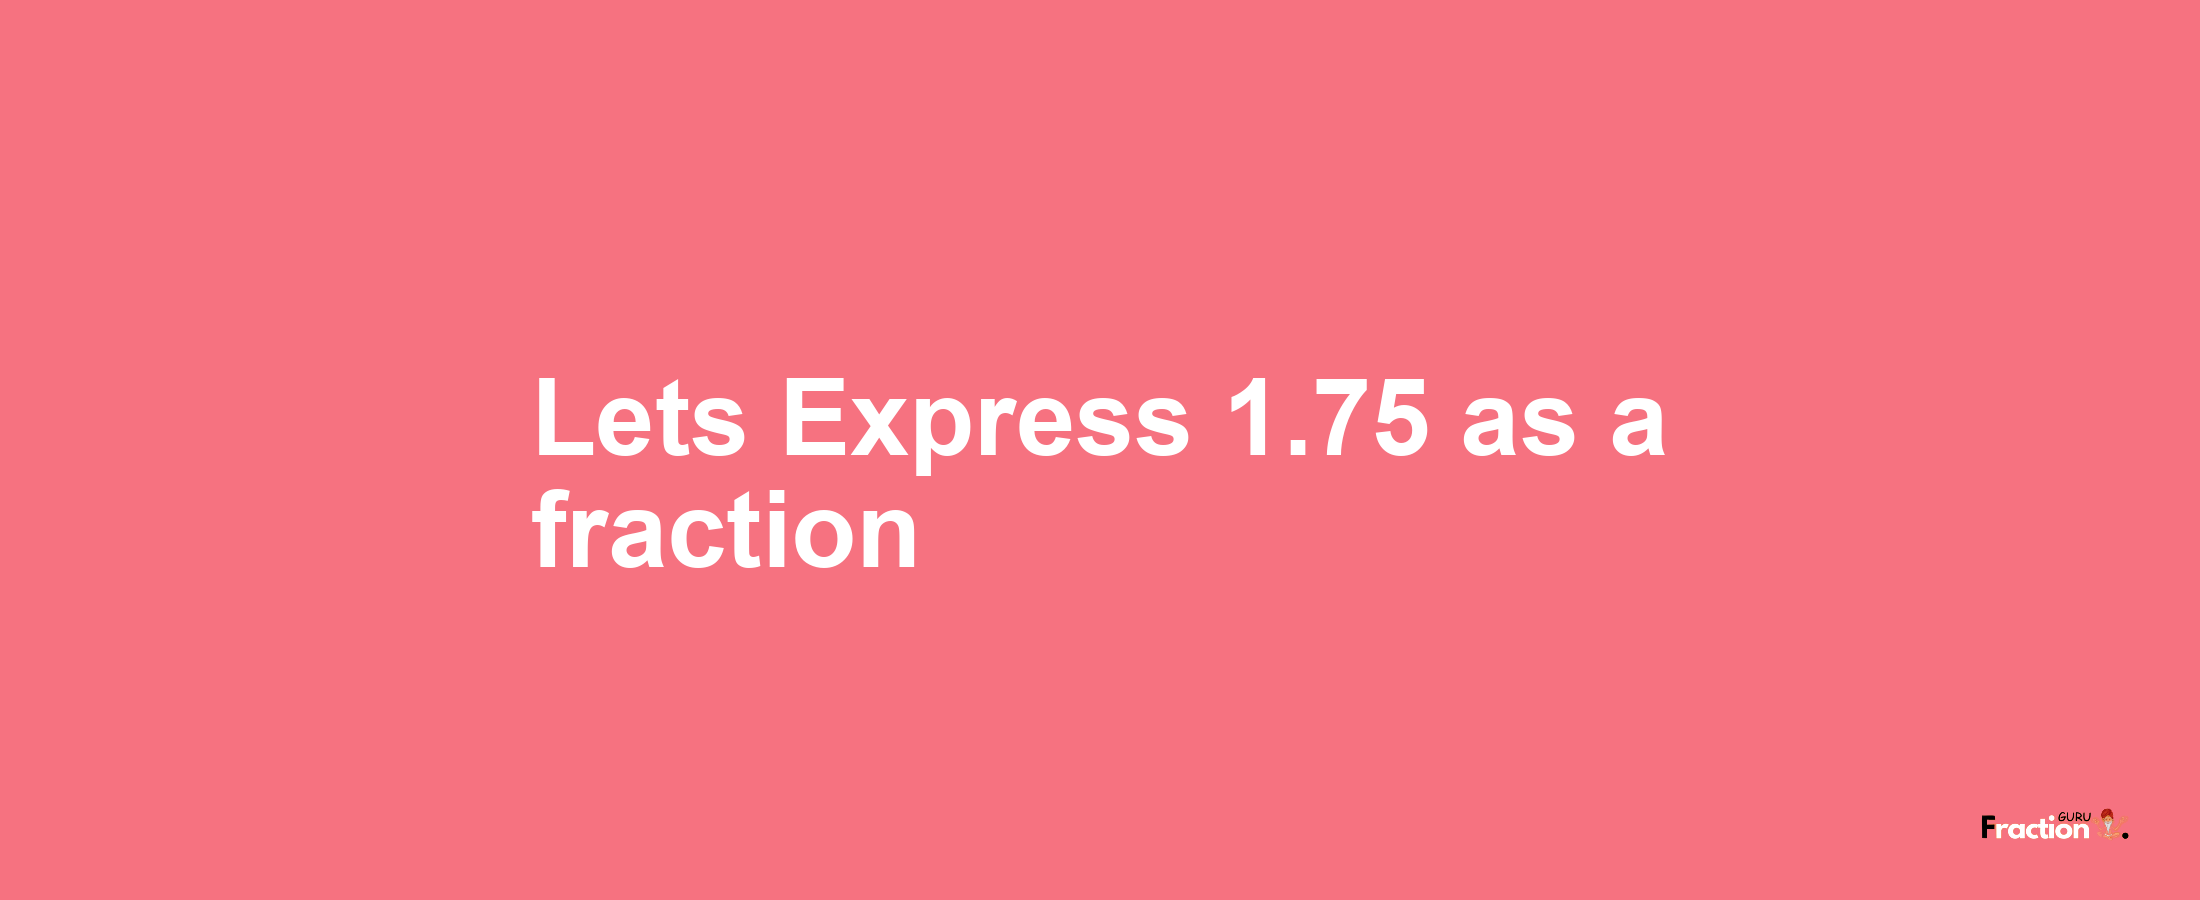 Lets Express 1.75 as afraction